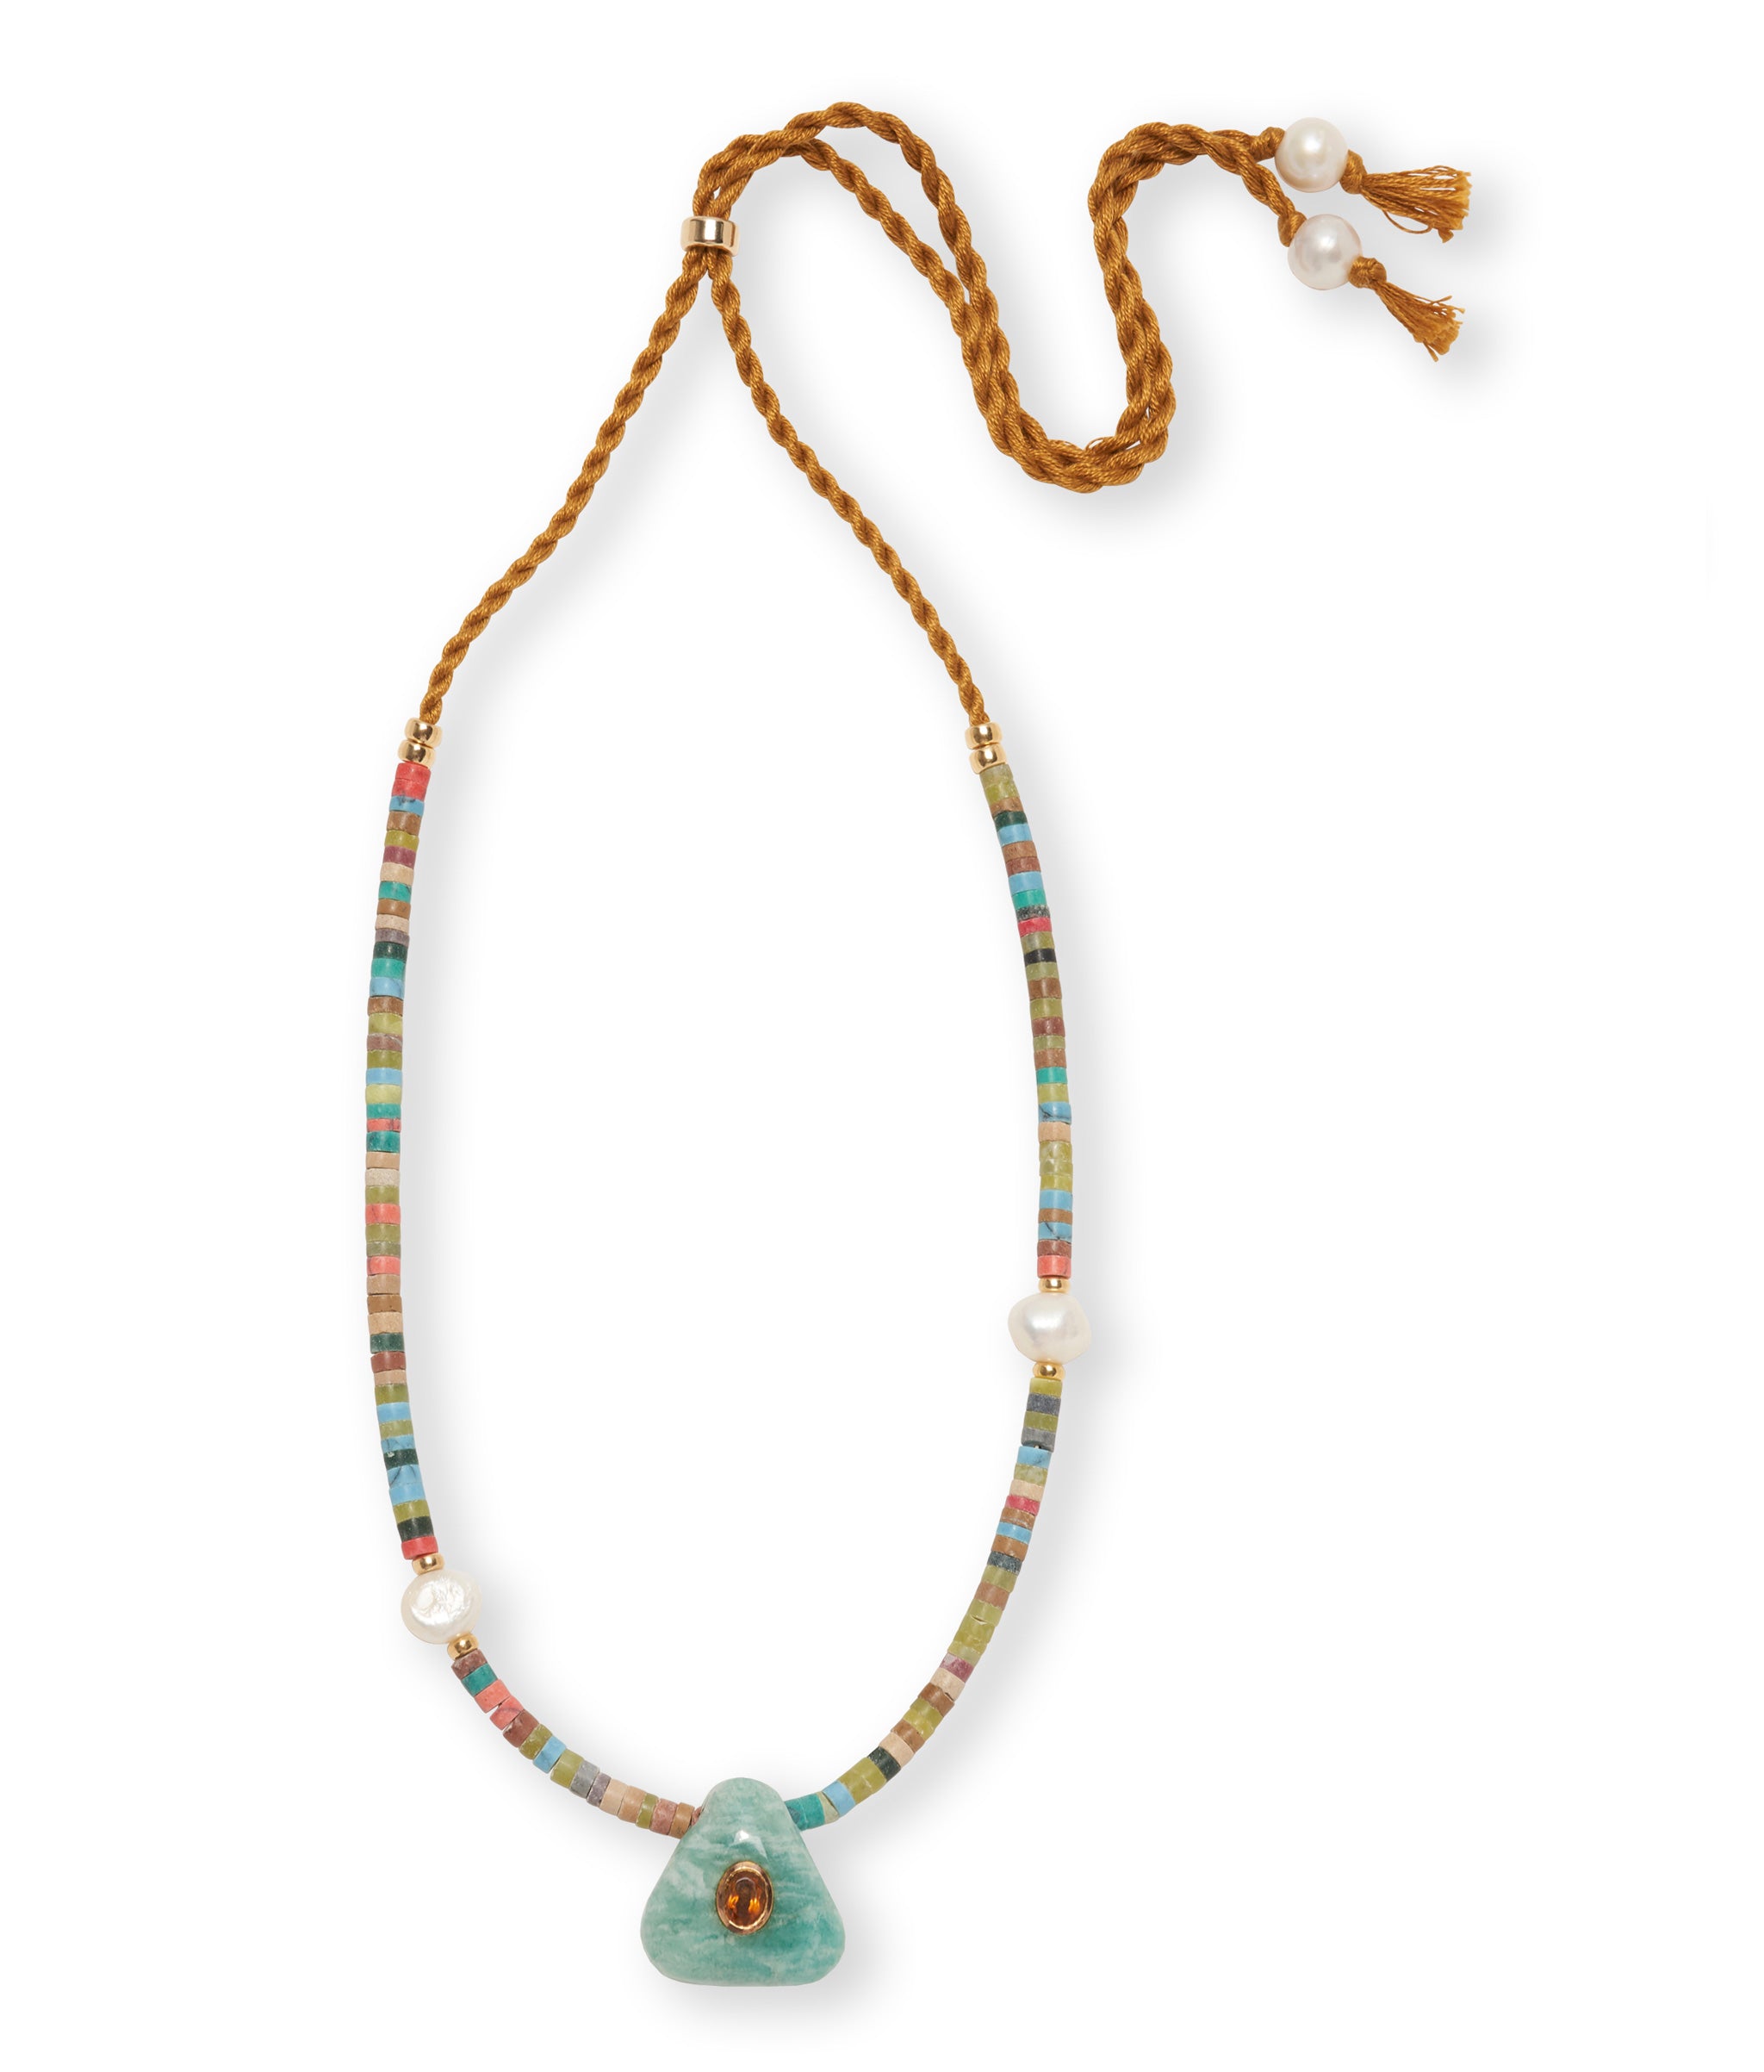 Boca Chica Necklace in Sand